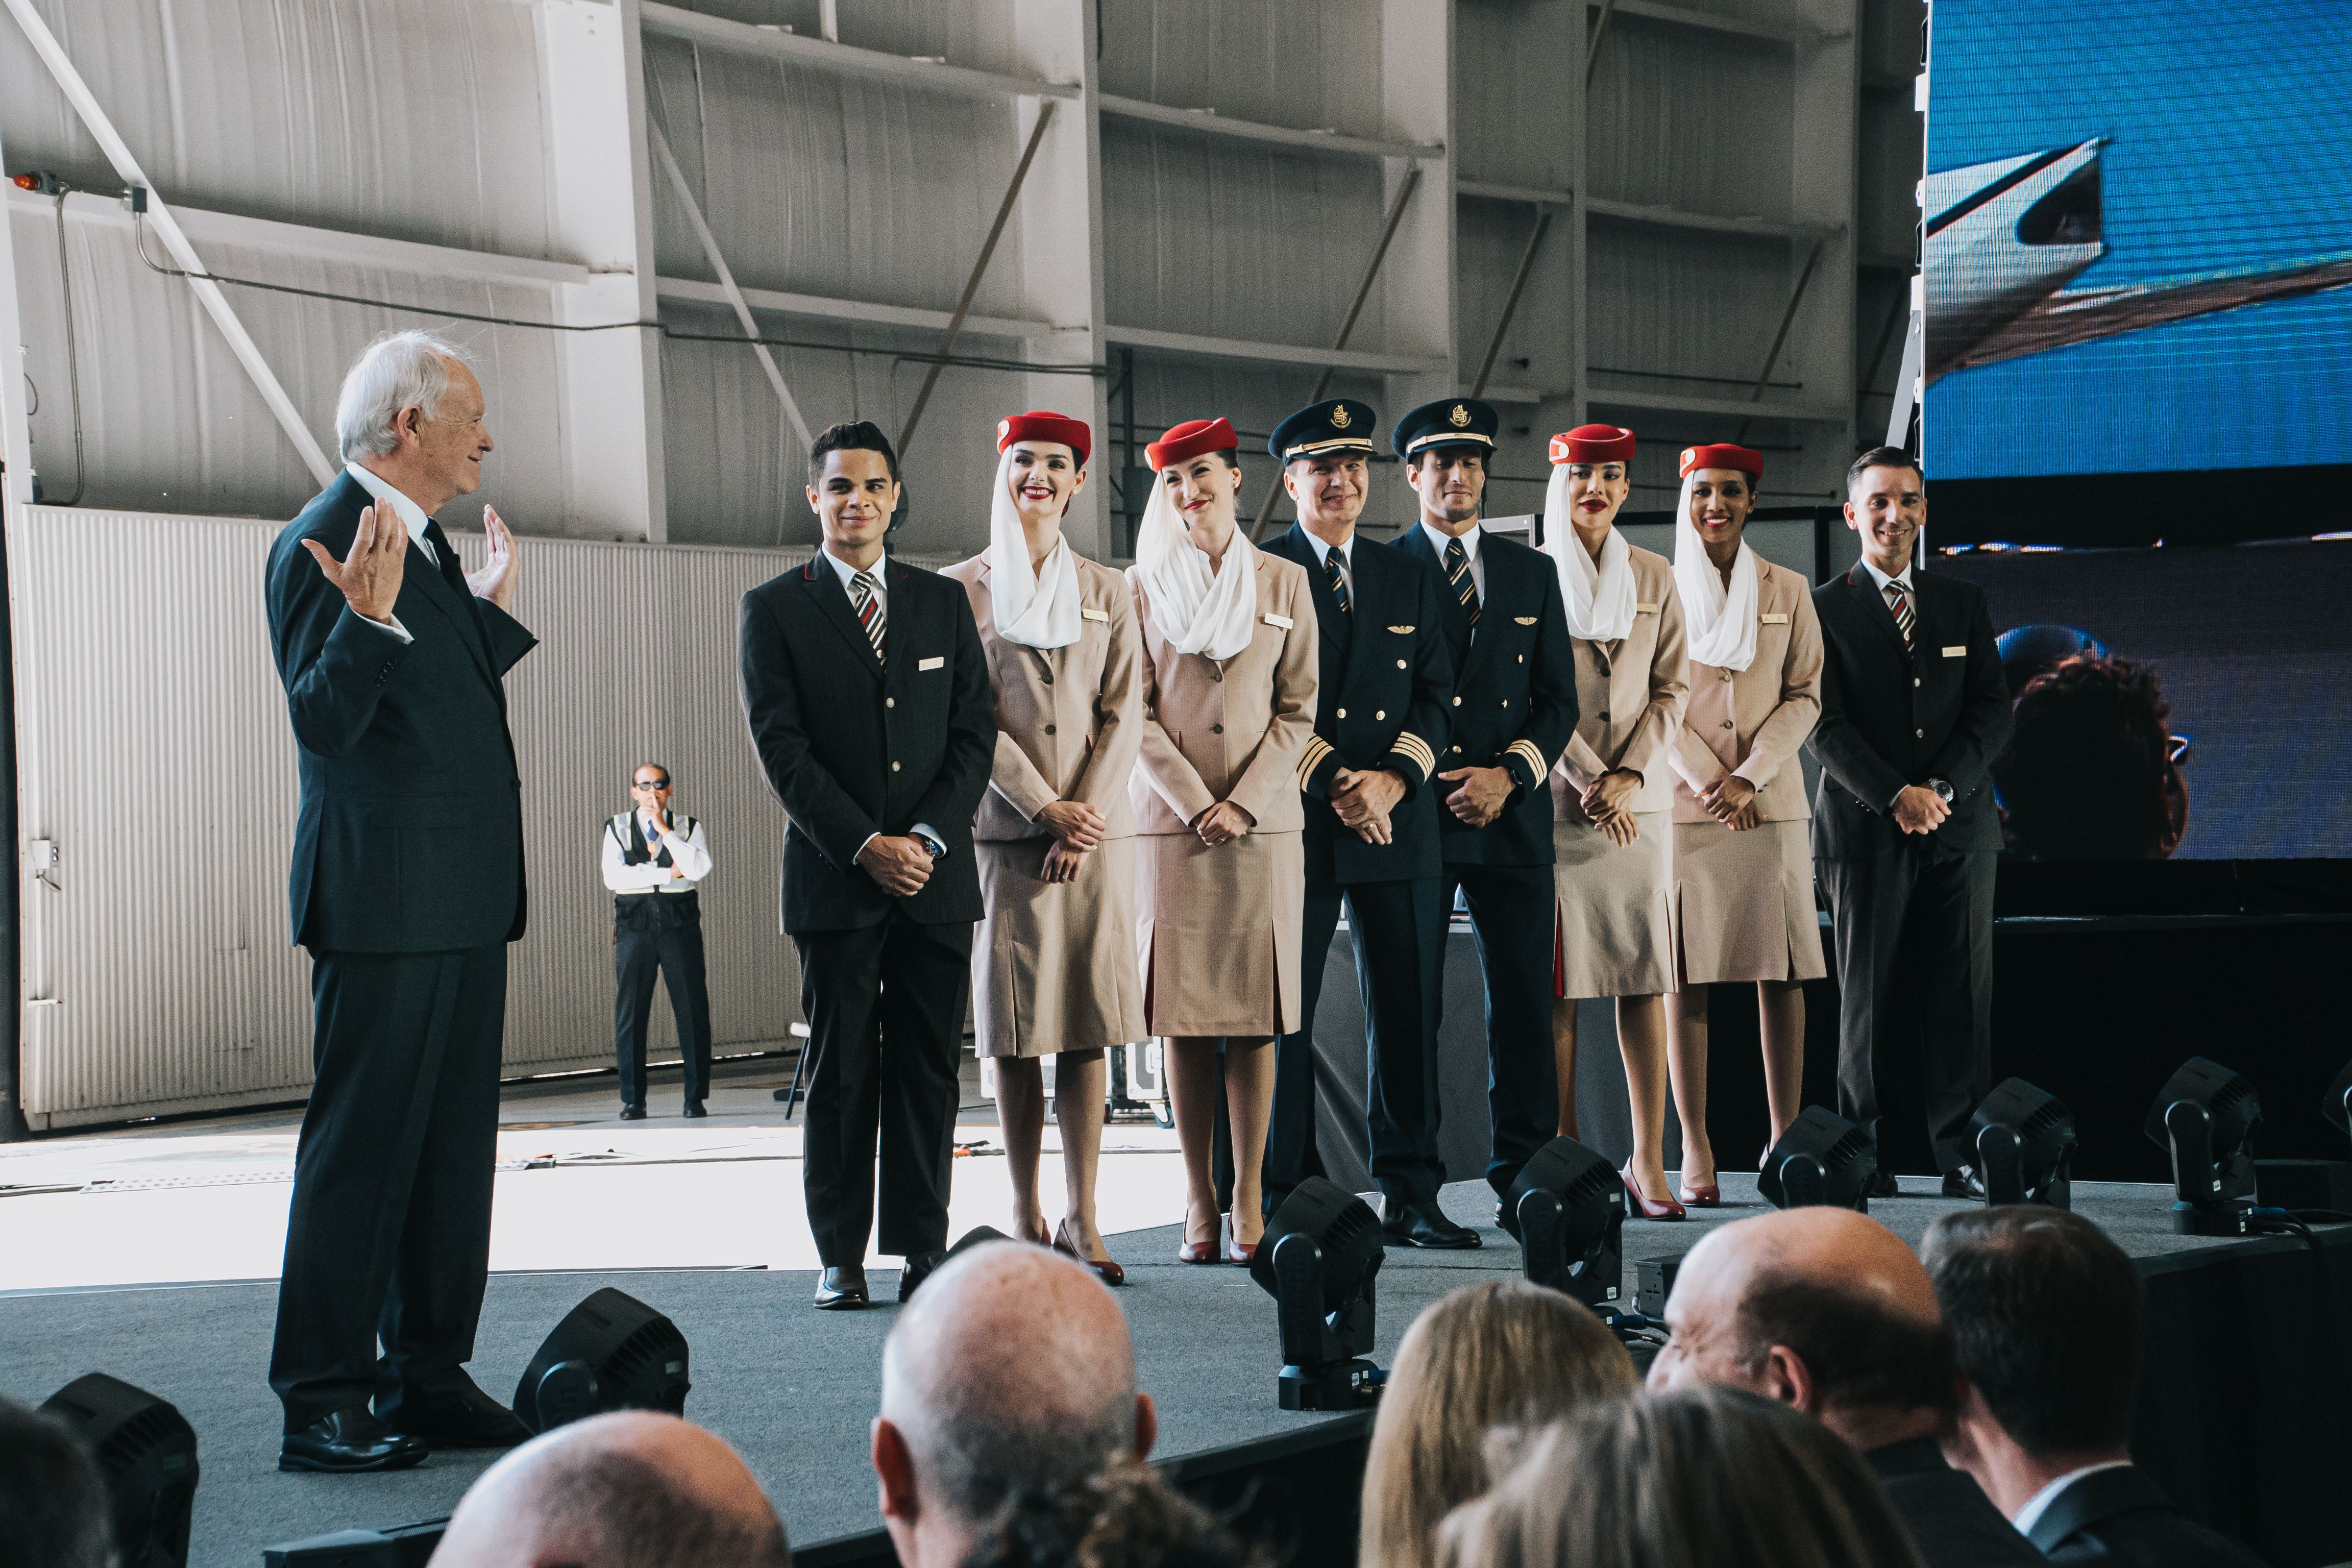 Emirates crew onstage with Sir Tim Clark